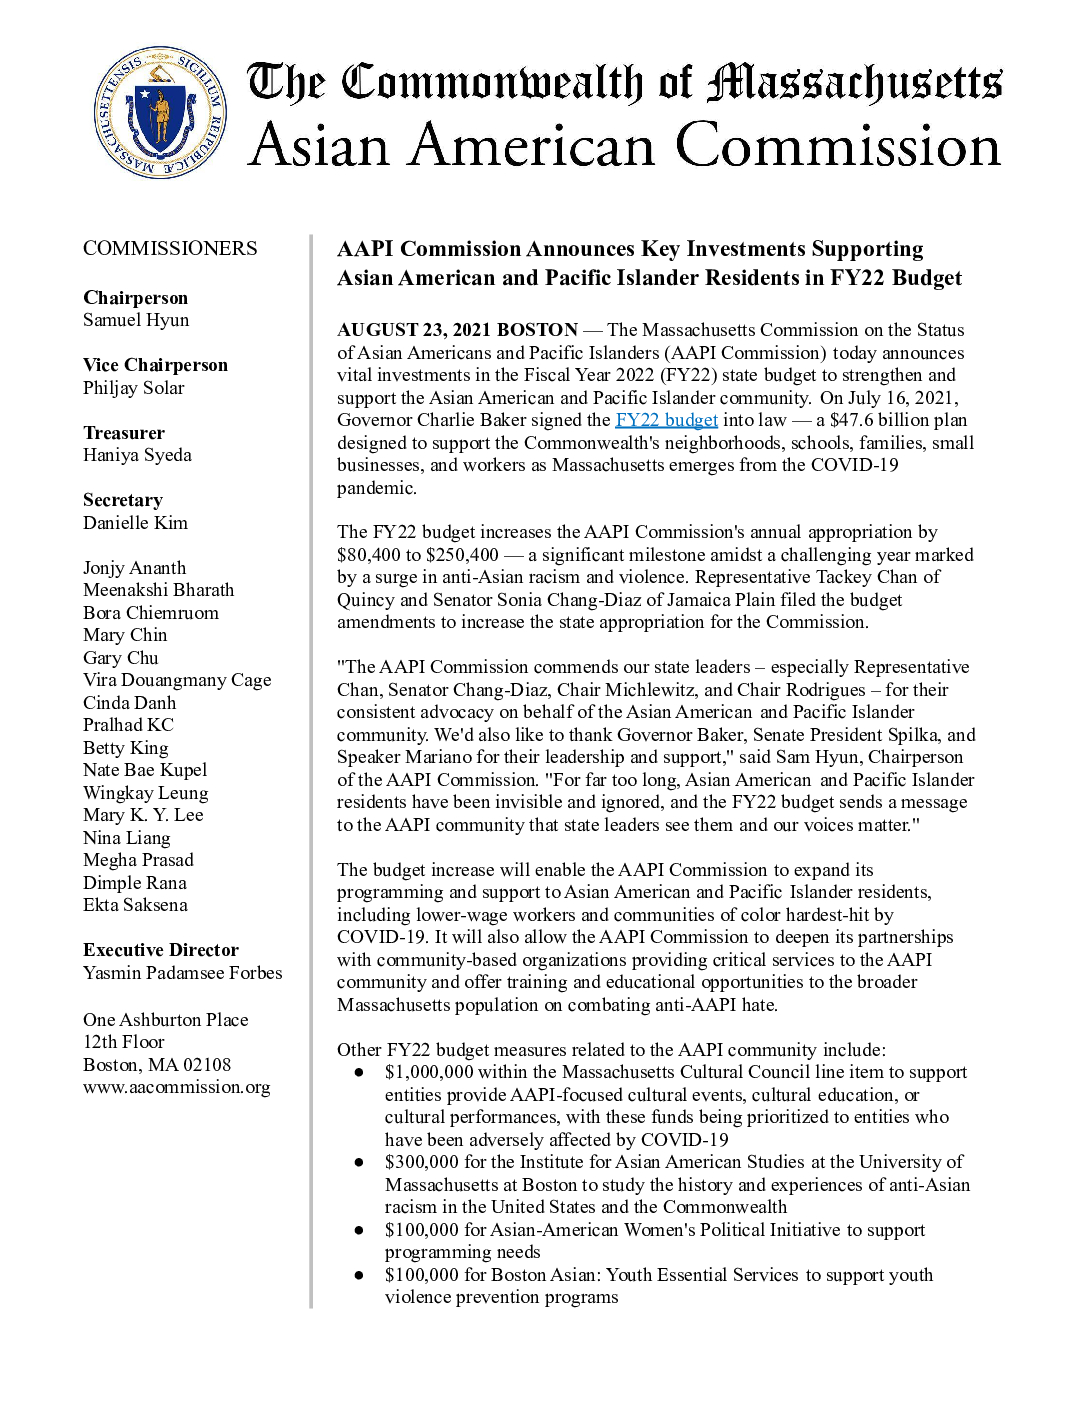 Press Release: AAPI Commission Announces Key Investments Supporting Asian American and Pacific Islander Residents in FY22 Budget